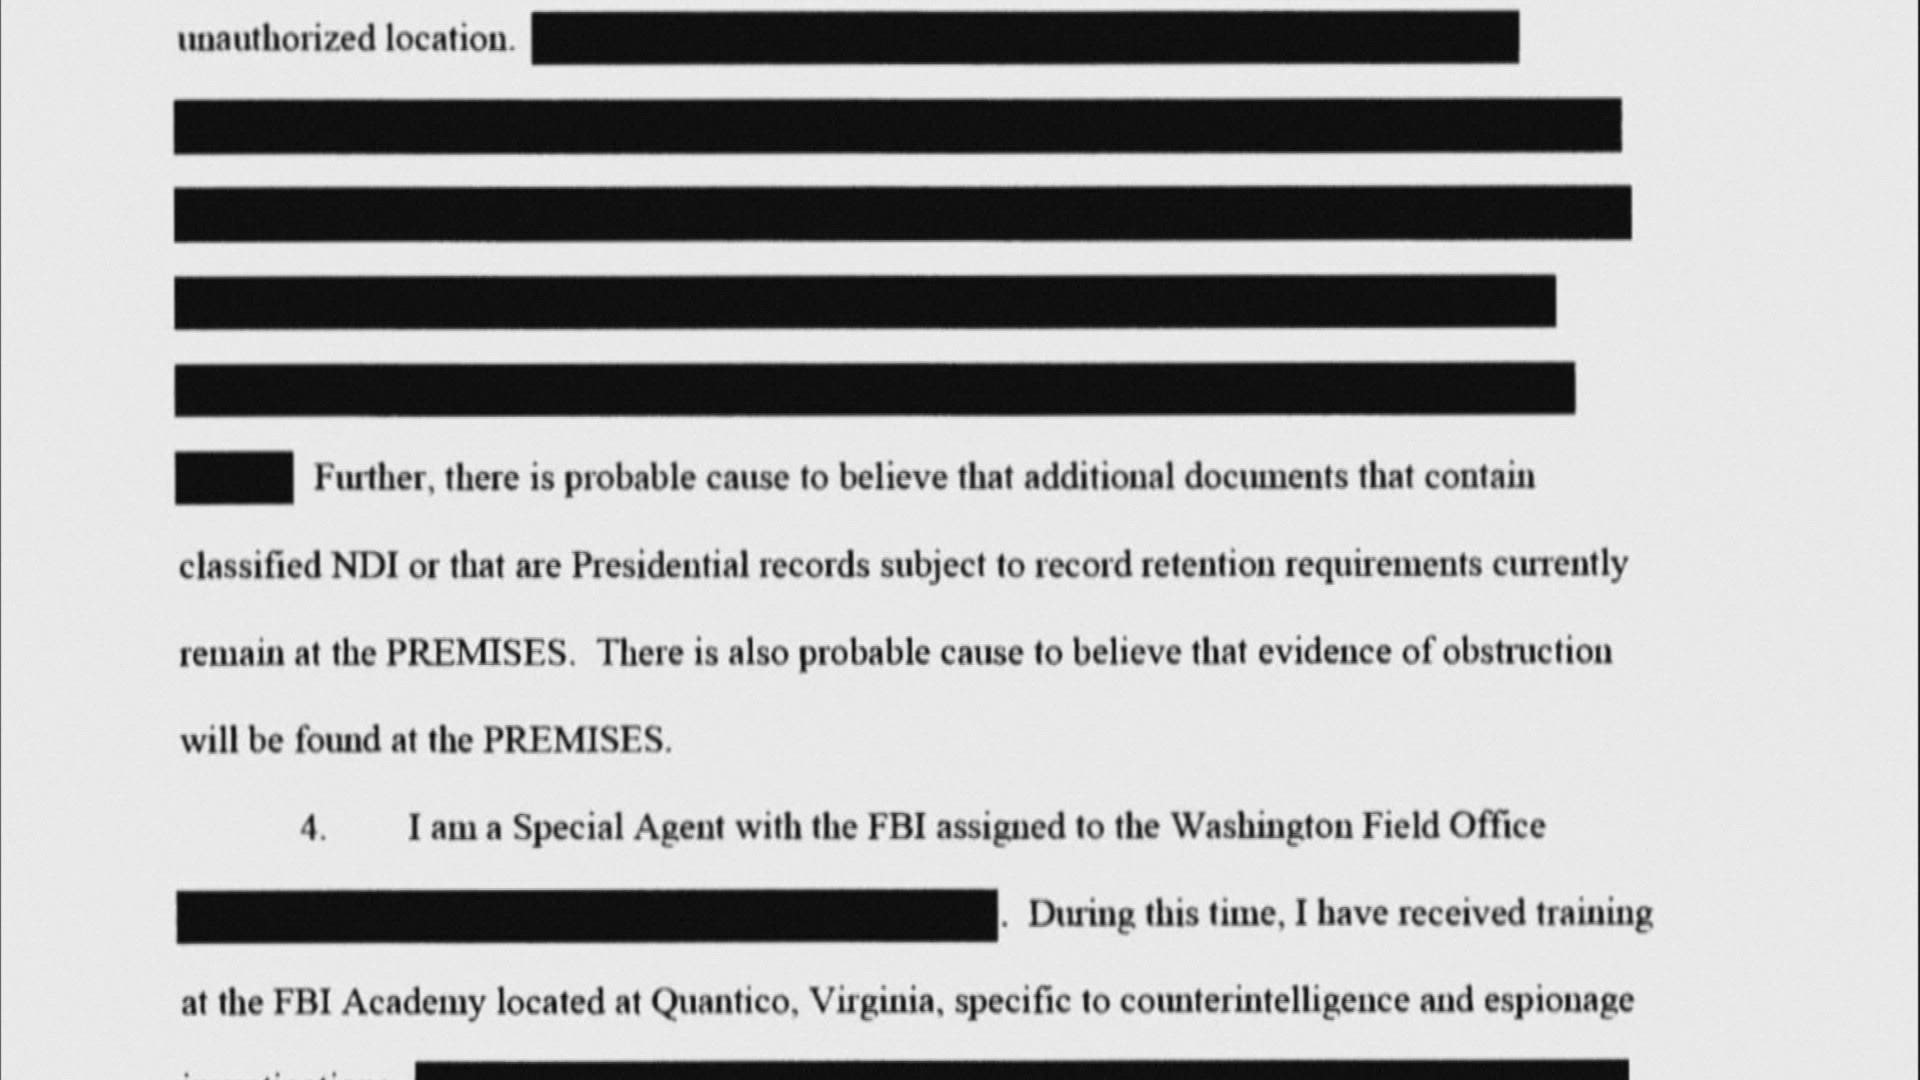 The document is heavily blacked out, but provides new information about what led the FBI to search the former president's estate.